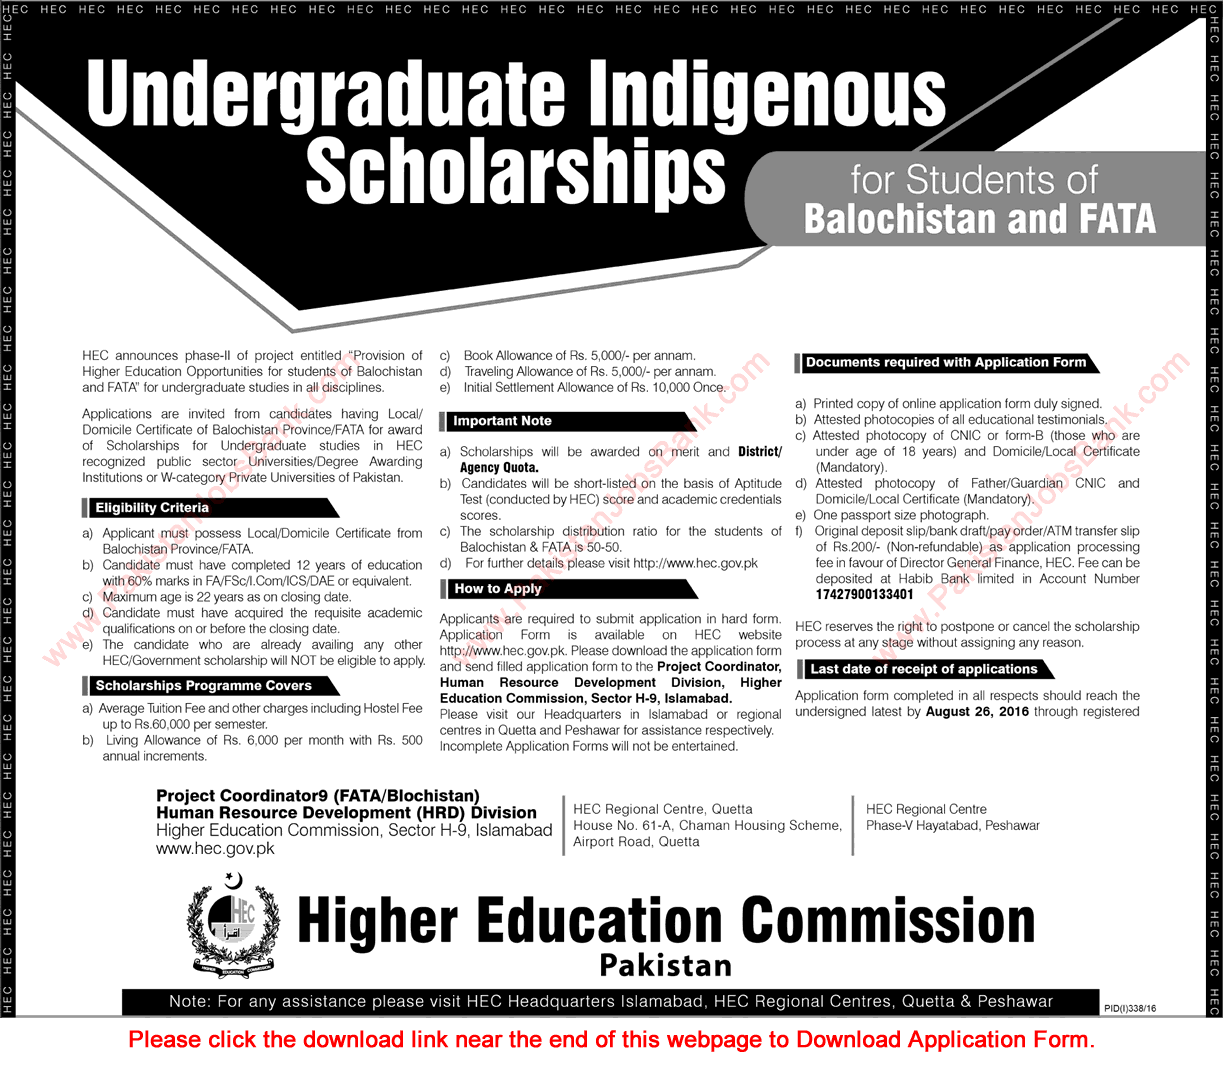 HEC Undergraduate Indigenous Scholarships July 2016 Application Form for Students of Balochistan & FATA Latest